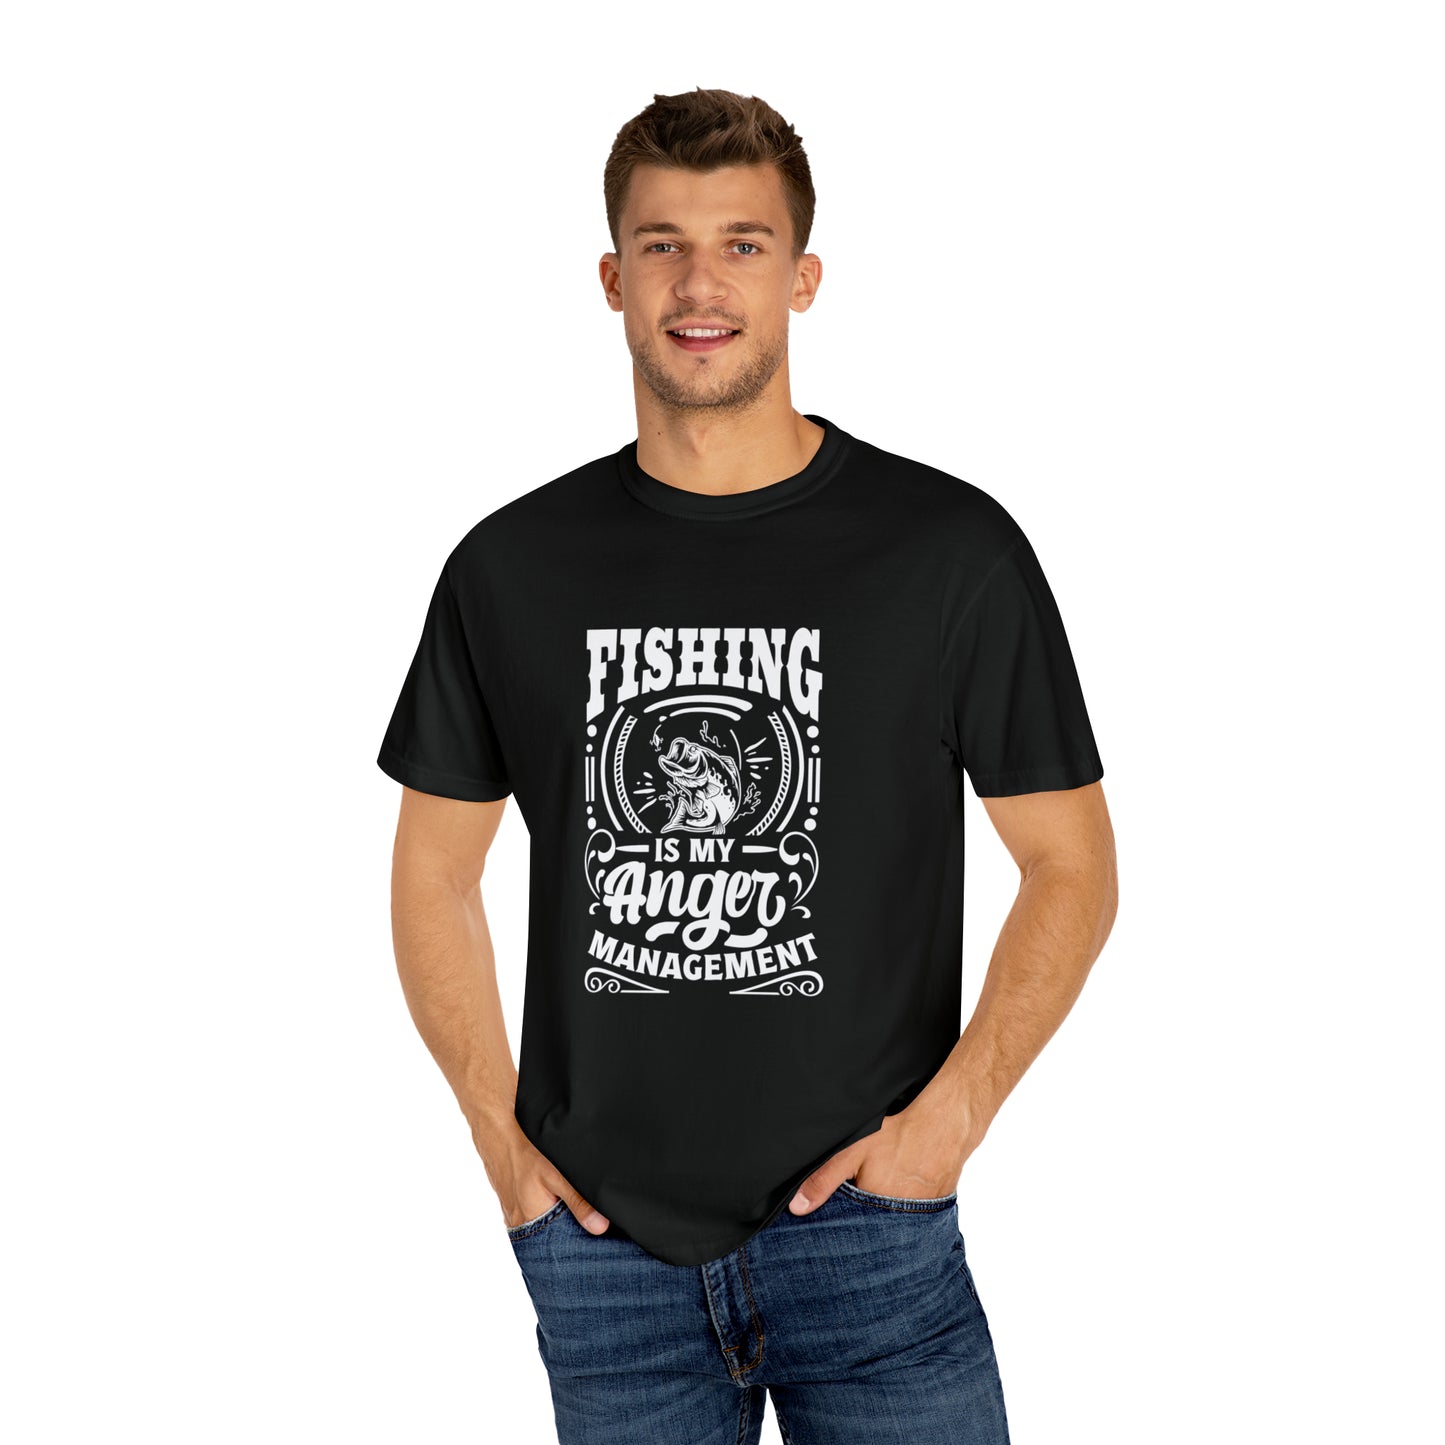 "Fishing is My Anger Management" T-Shirt